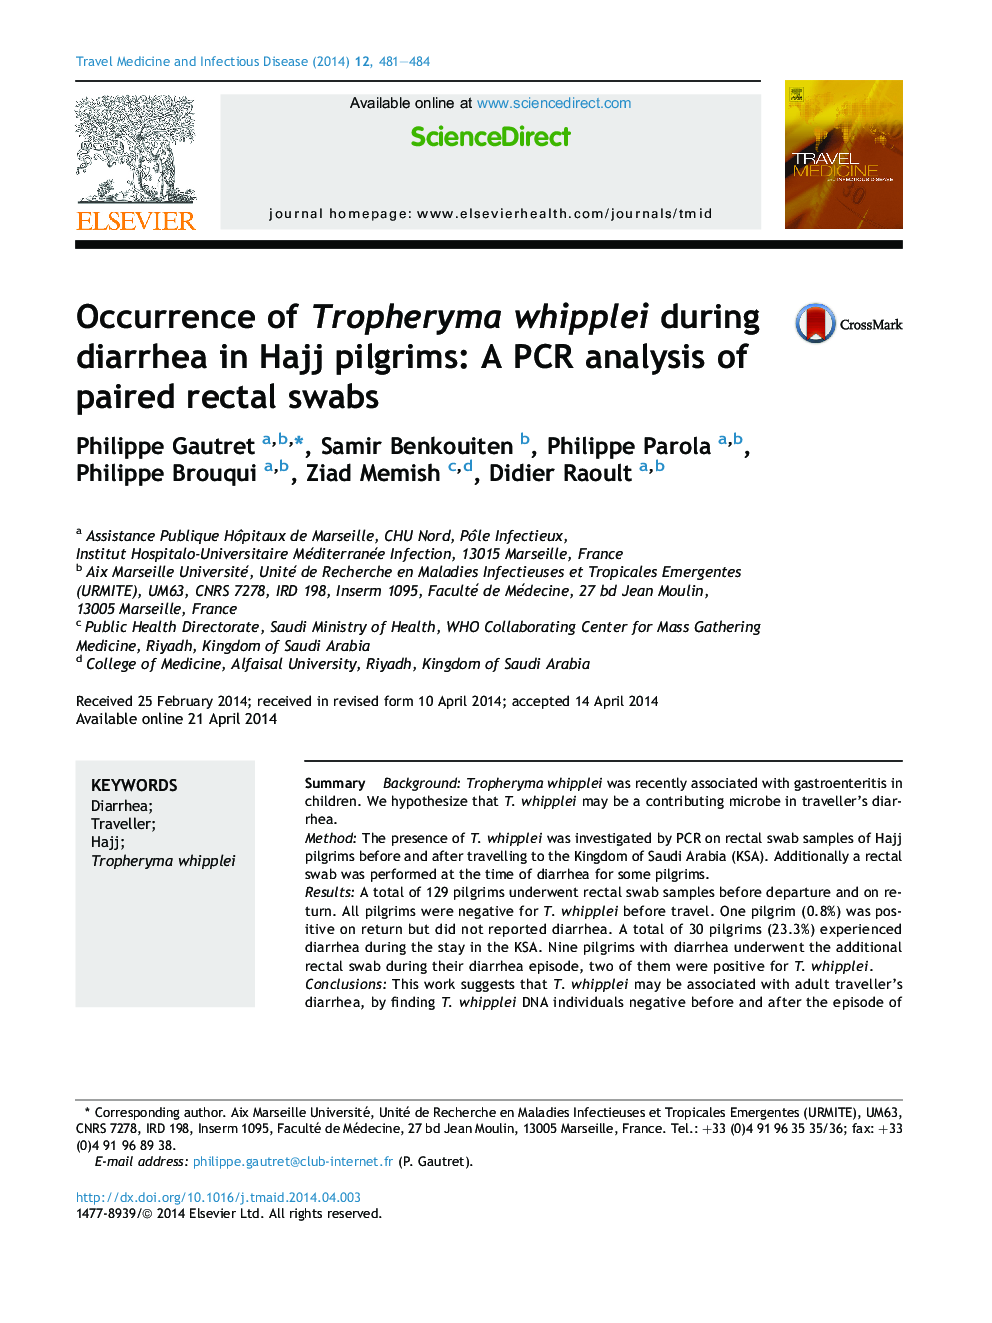 Occurrence of Tropheryma whipplei during diarrhea in Hajj pilgrims: A PCR analysis of paired rectal swabs